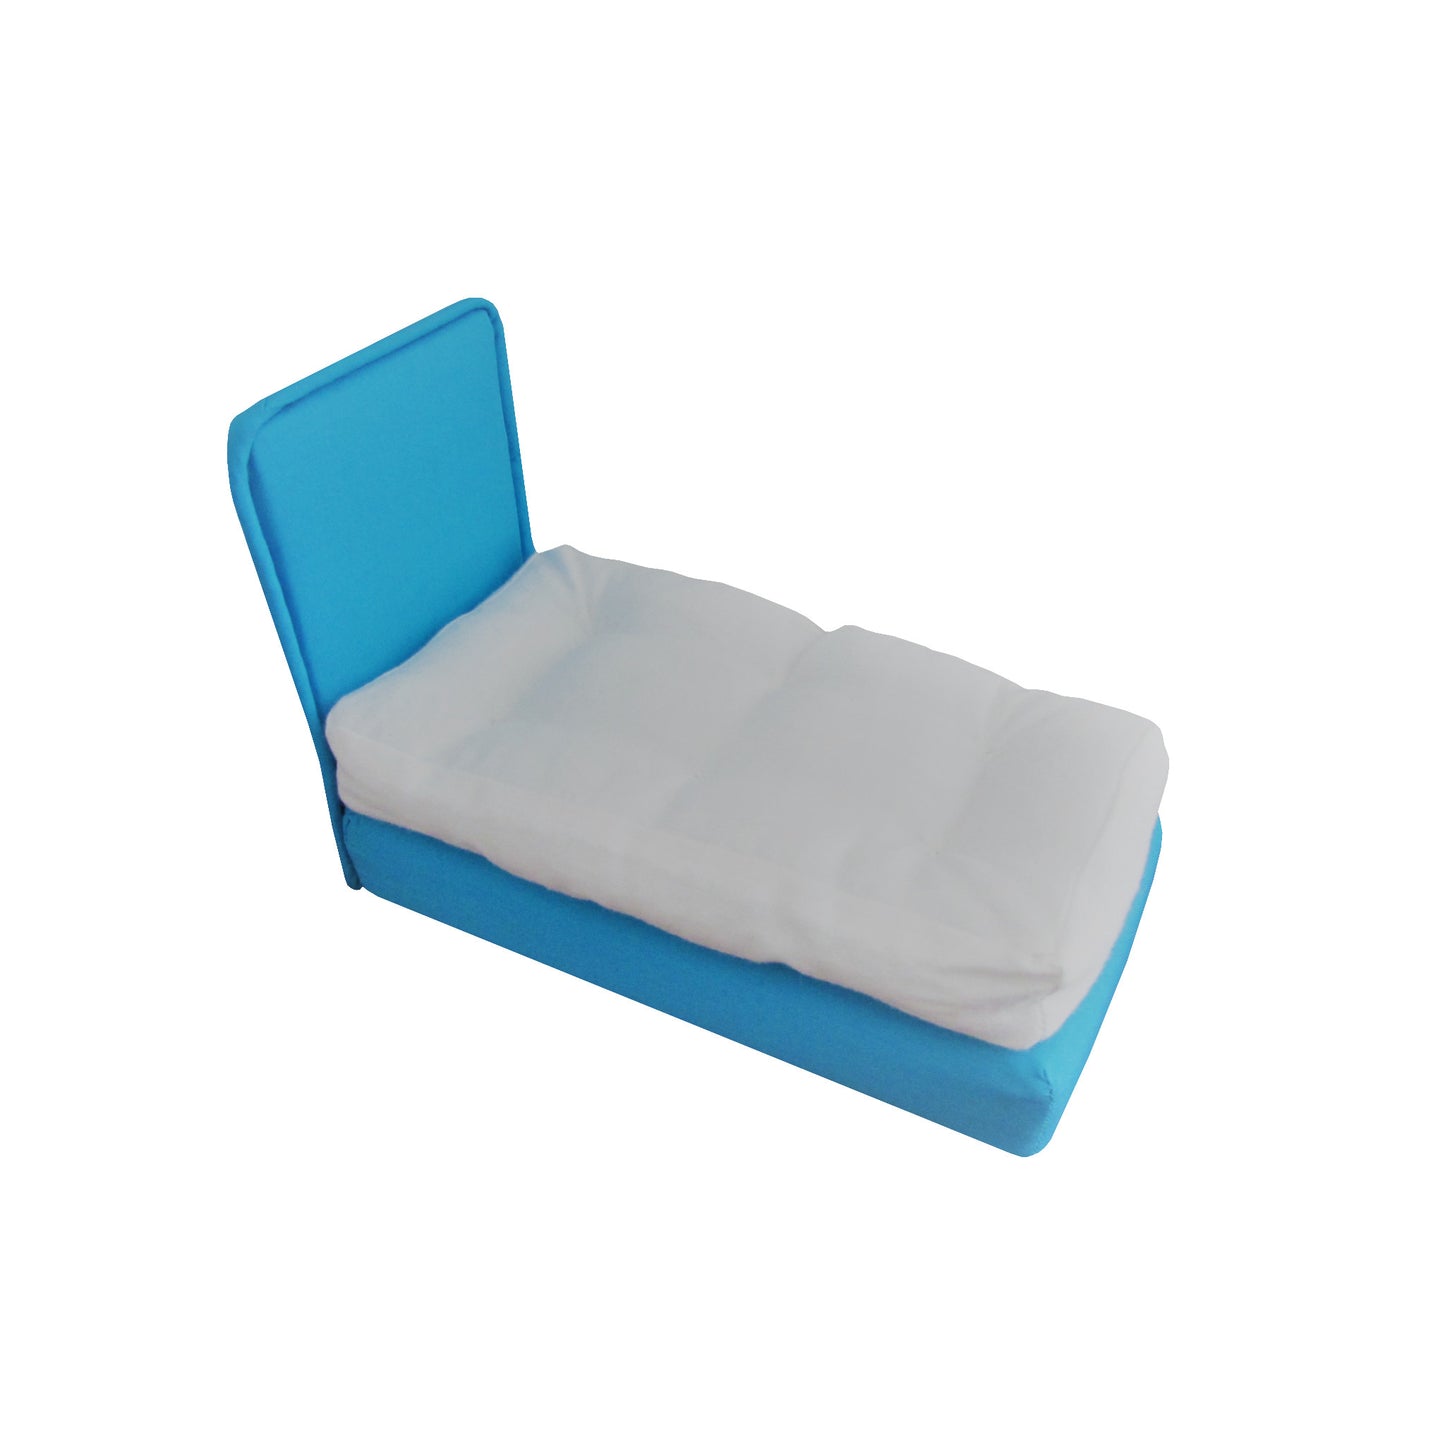 Upholstered Turquoise Doll Bed for 6 1/2-inch dolls